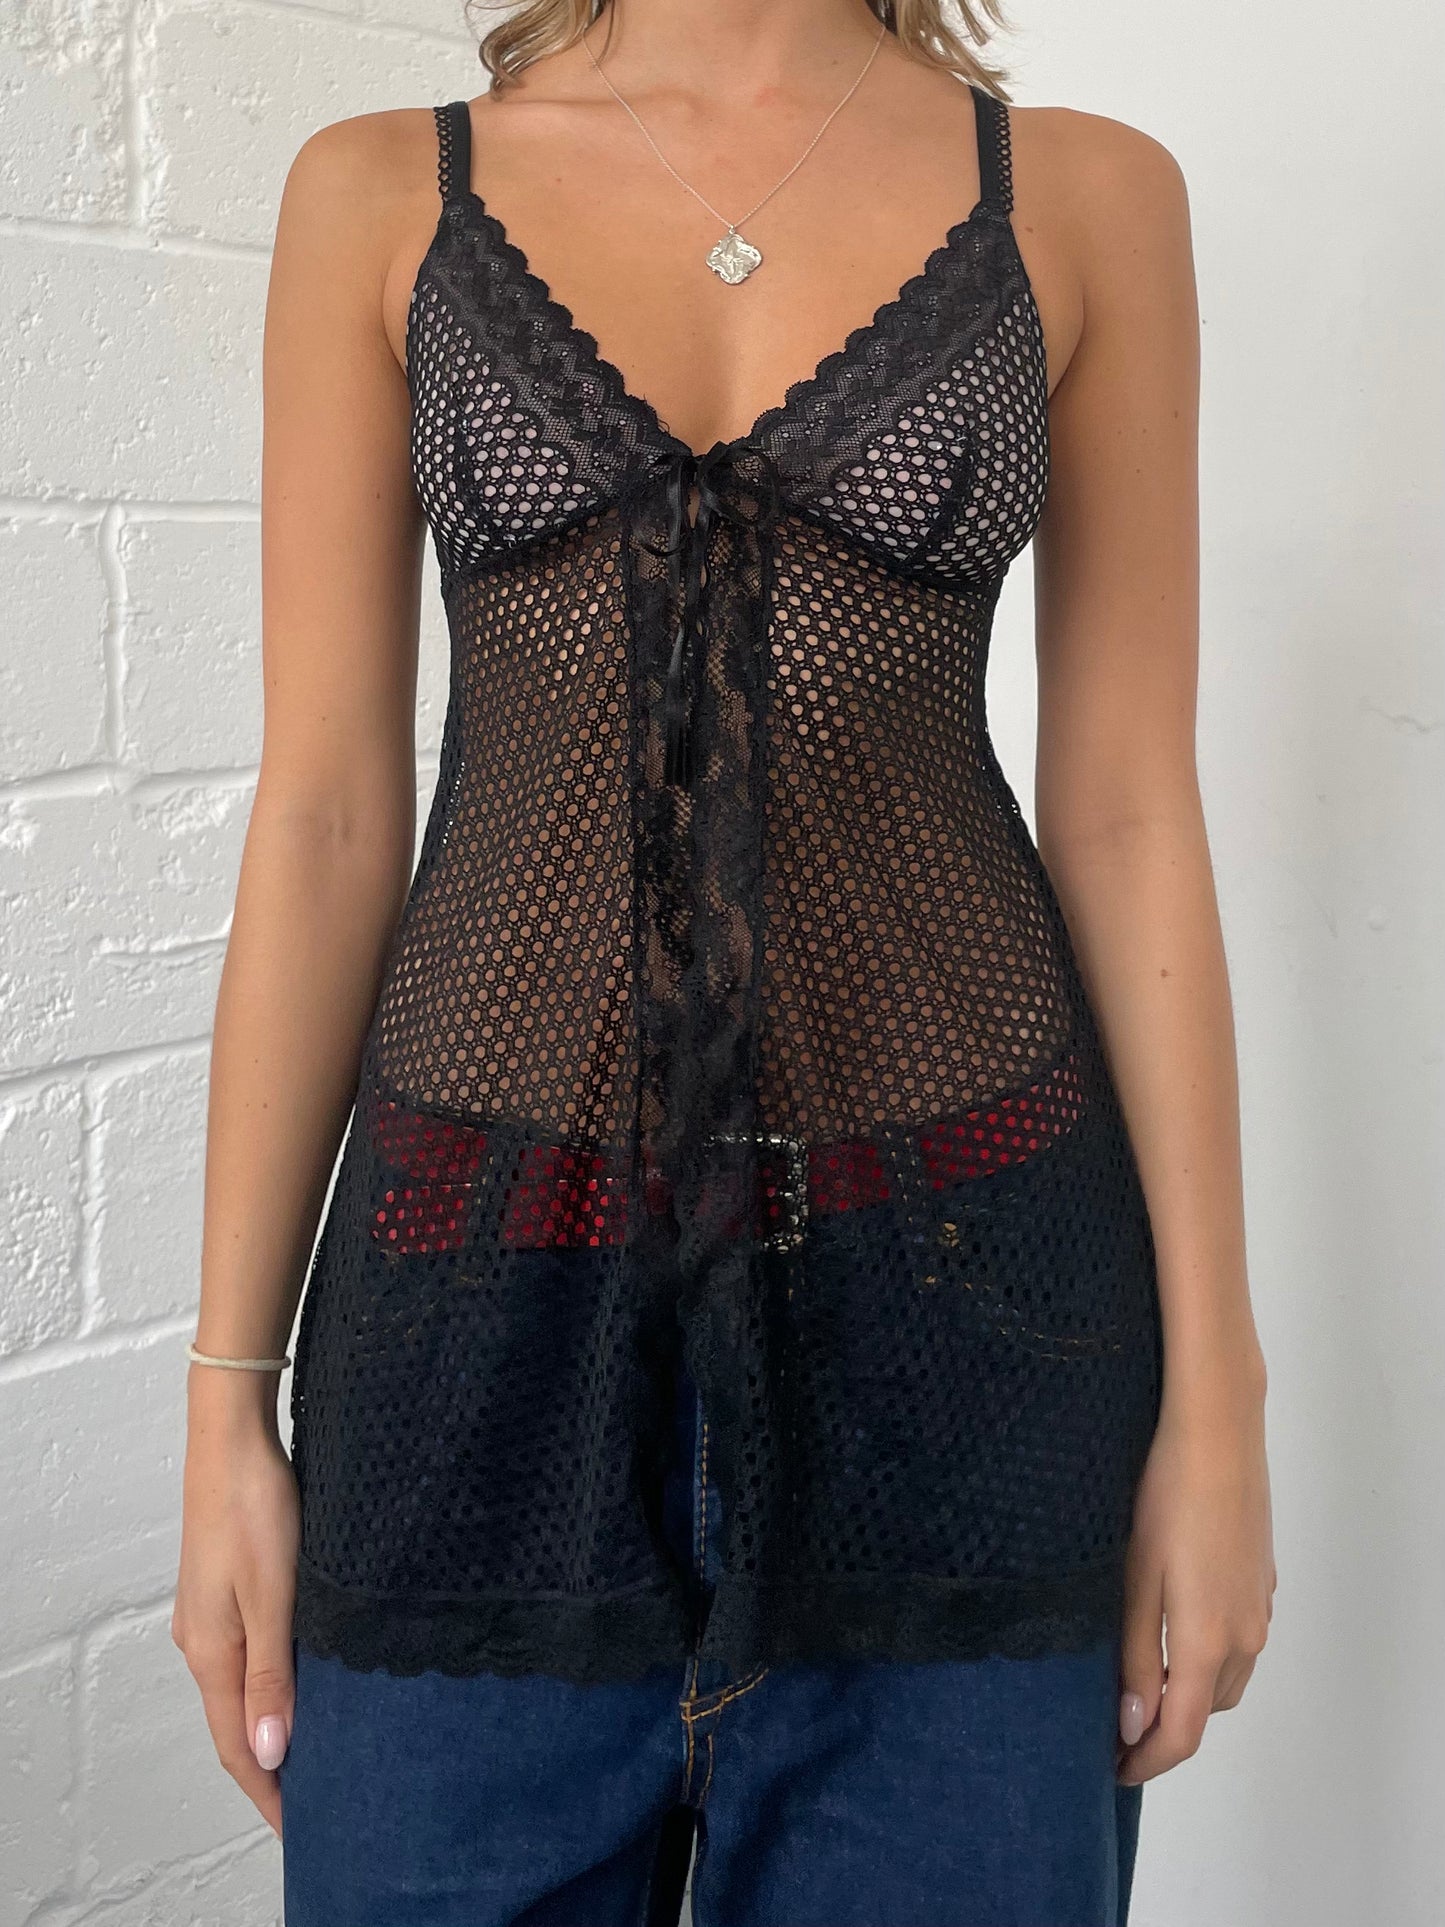 Mesh and Lace Lingerie Cami